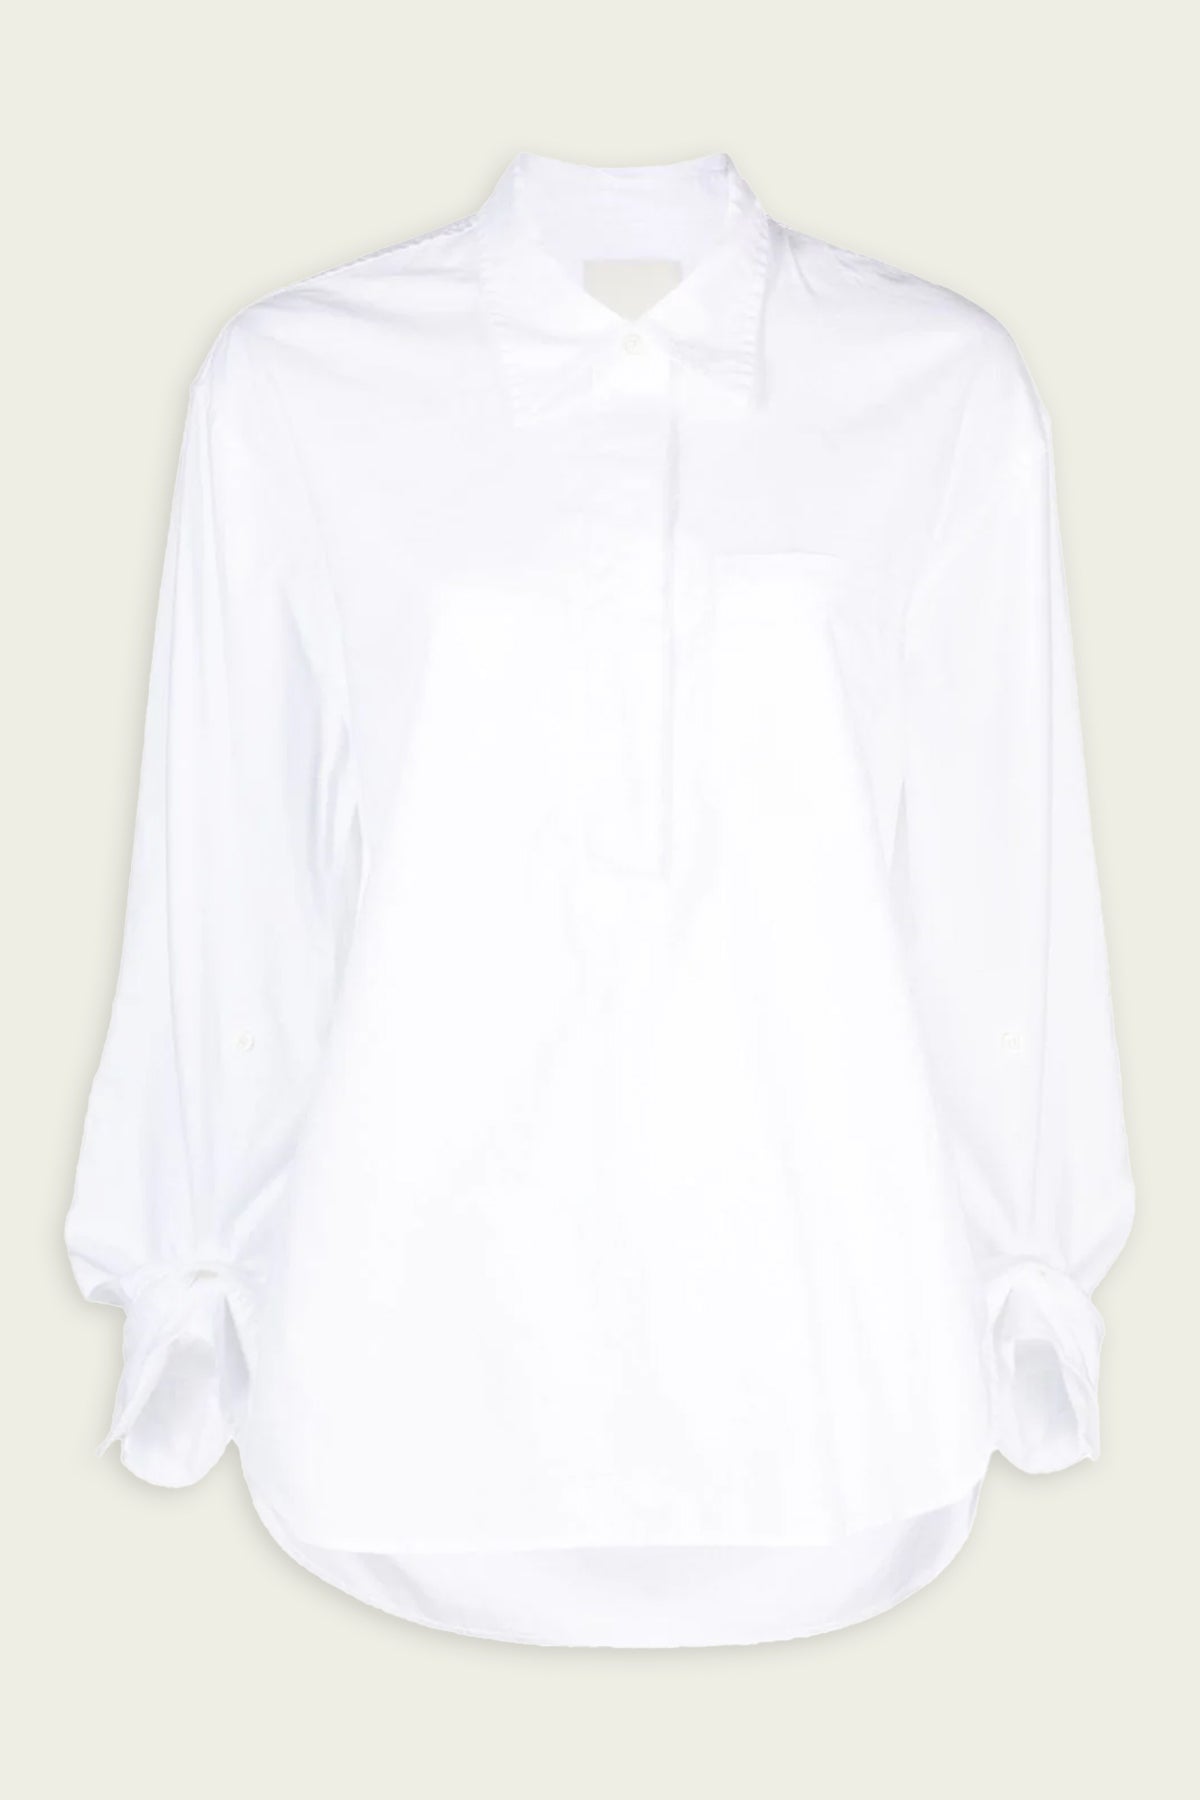 Aave Oversized Cuff Shirt in Oxford White - shop-olivia.com